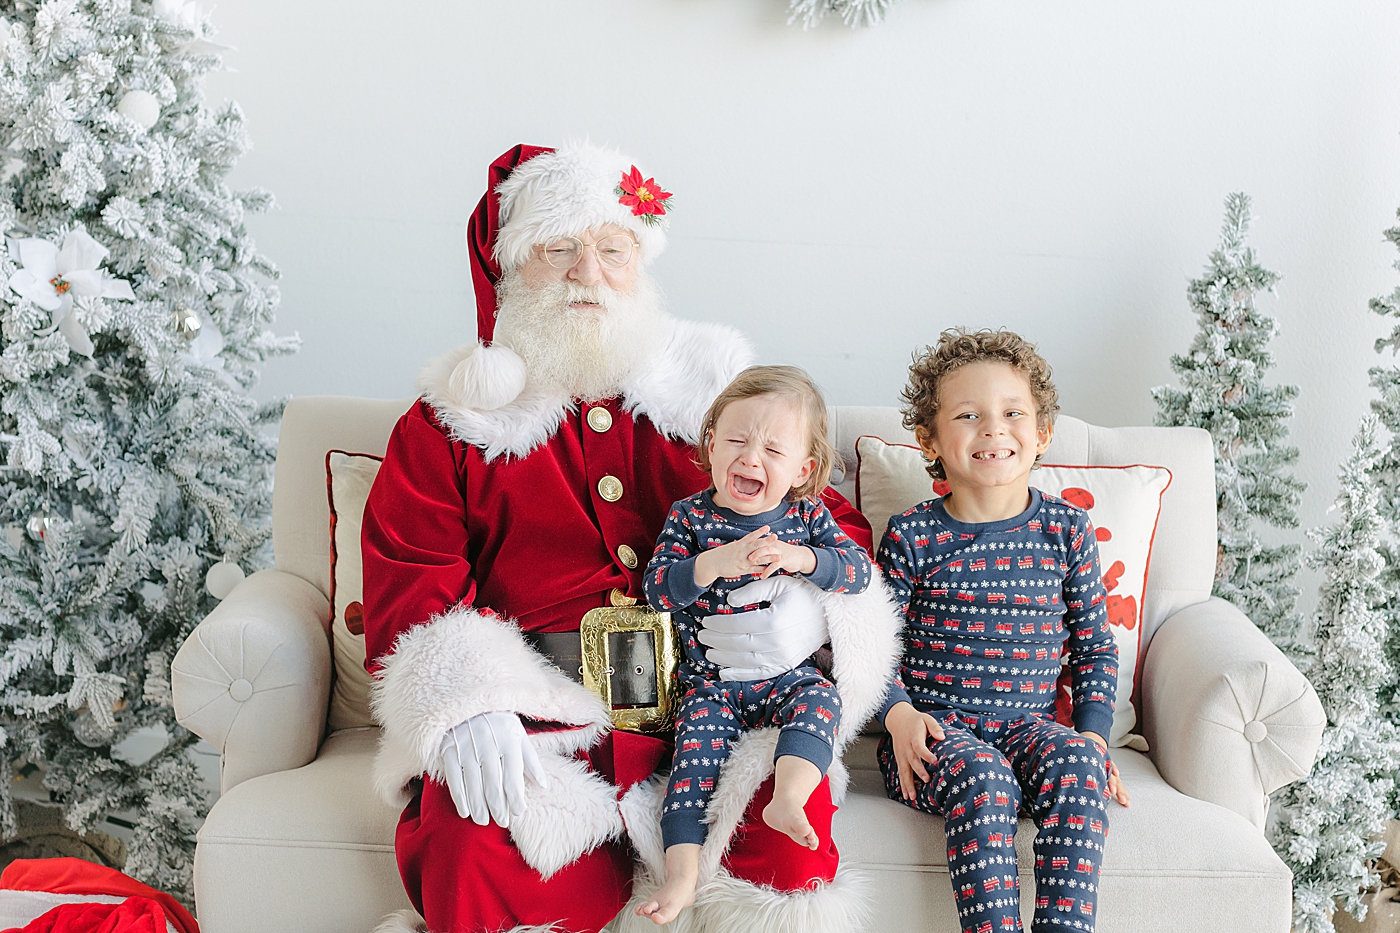 Siblings in Christmas pajamas sitting with Santa | Images by Sana Ahmed Photography